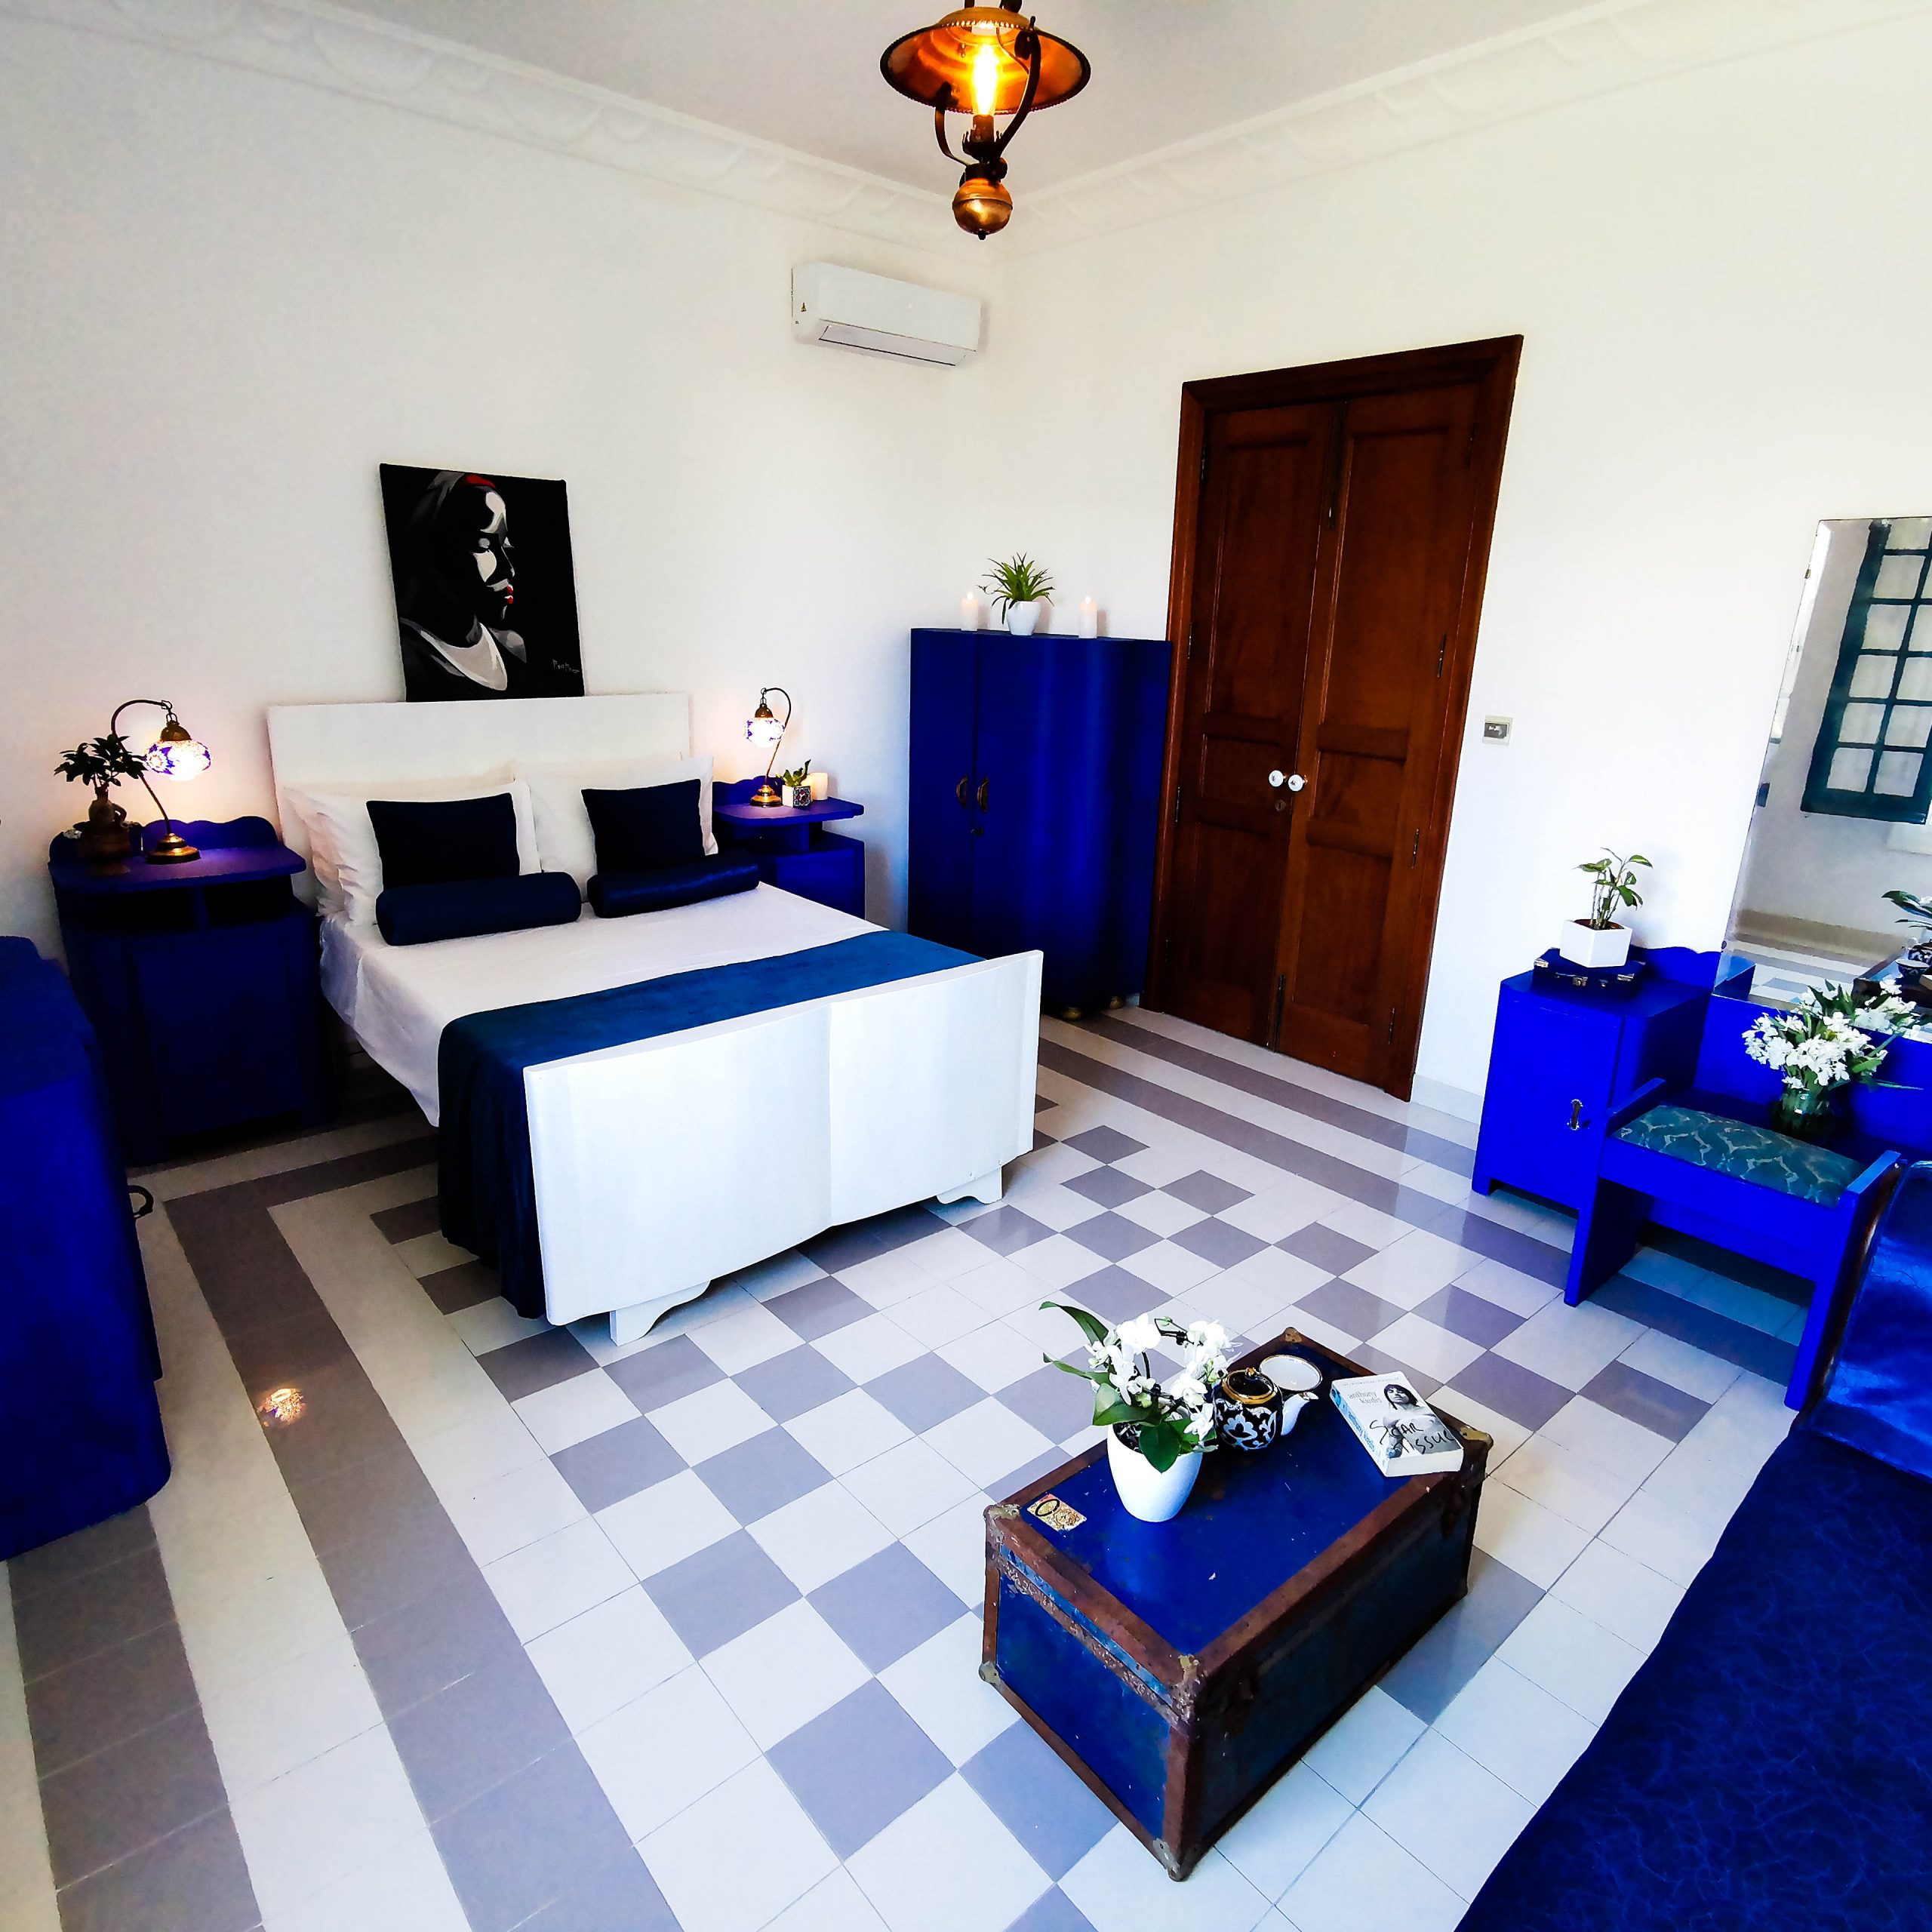 Coliving home in Malta for expats